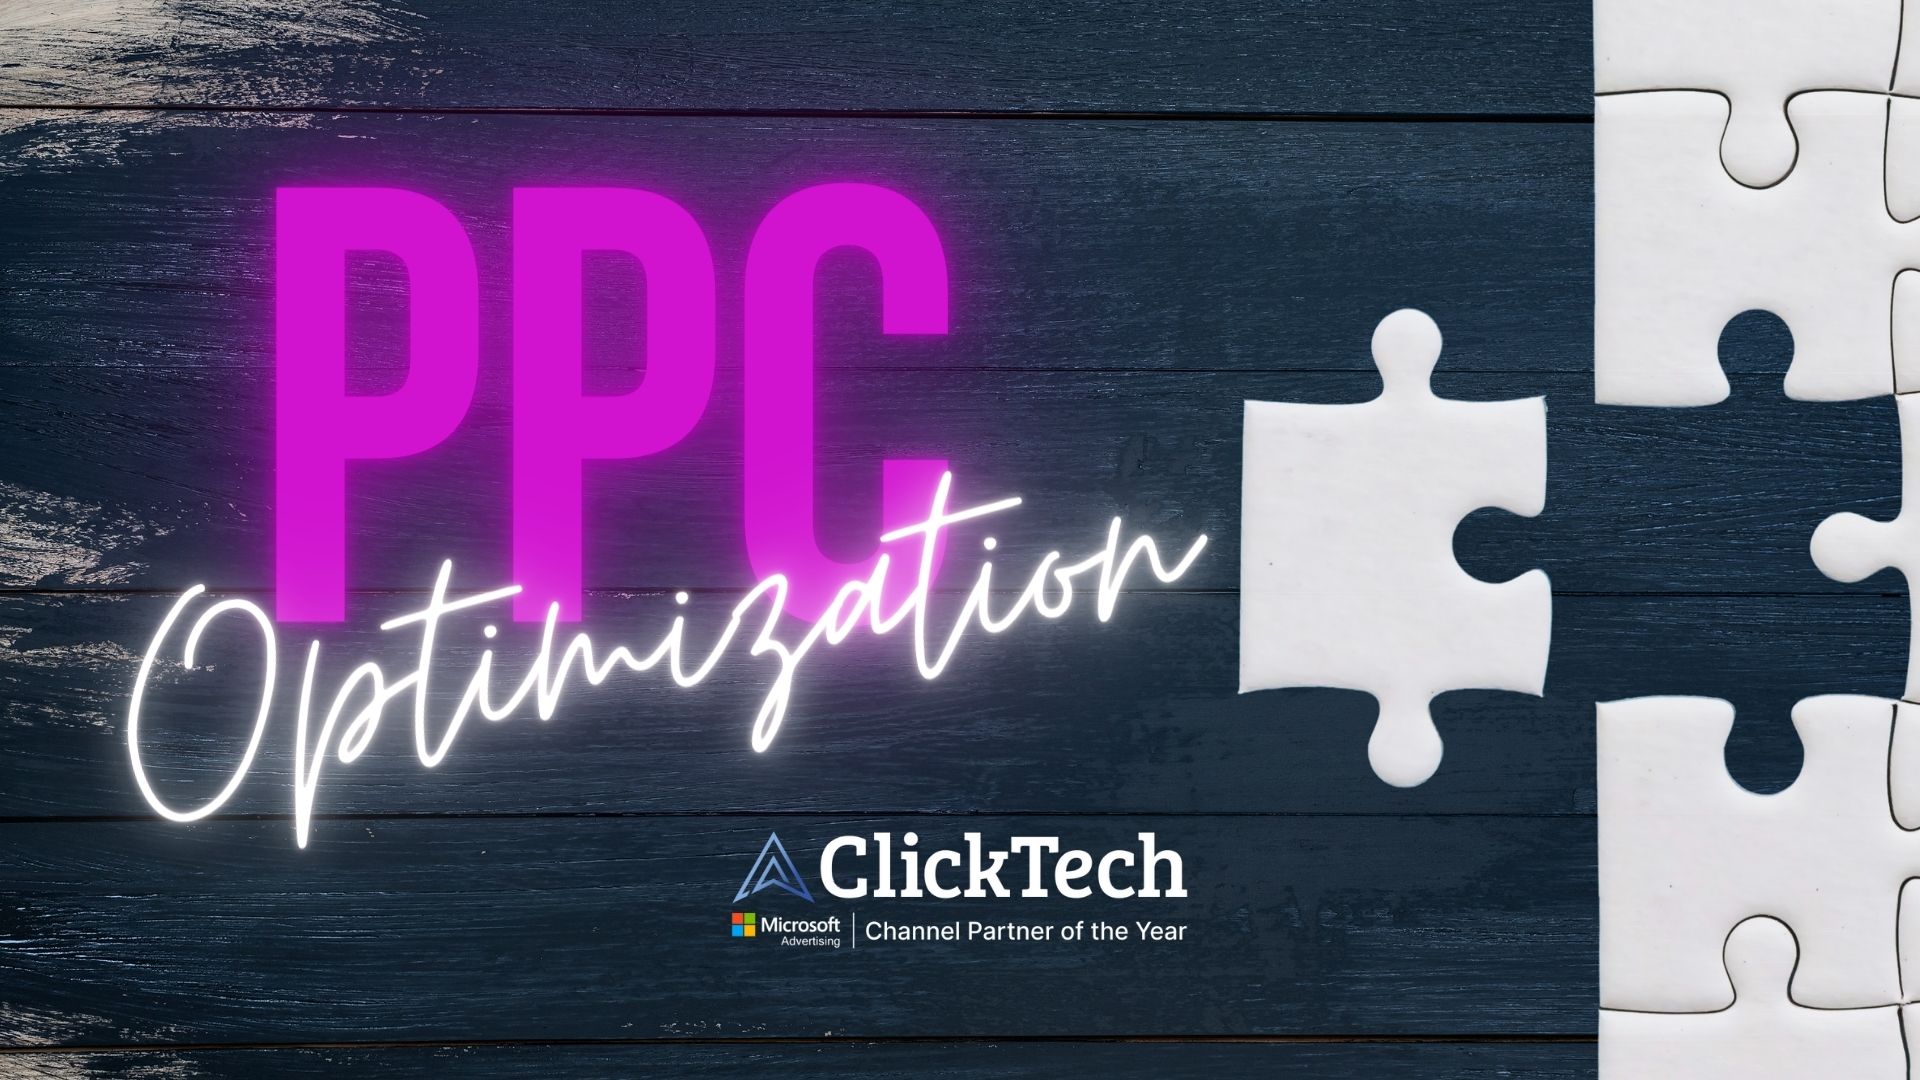 ppc campaigns optimization clicktech